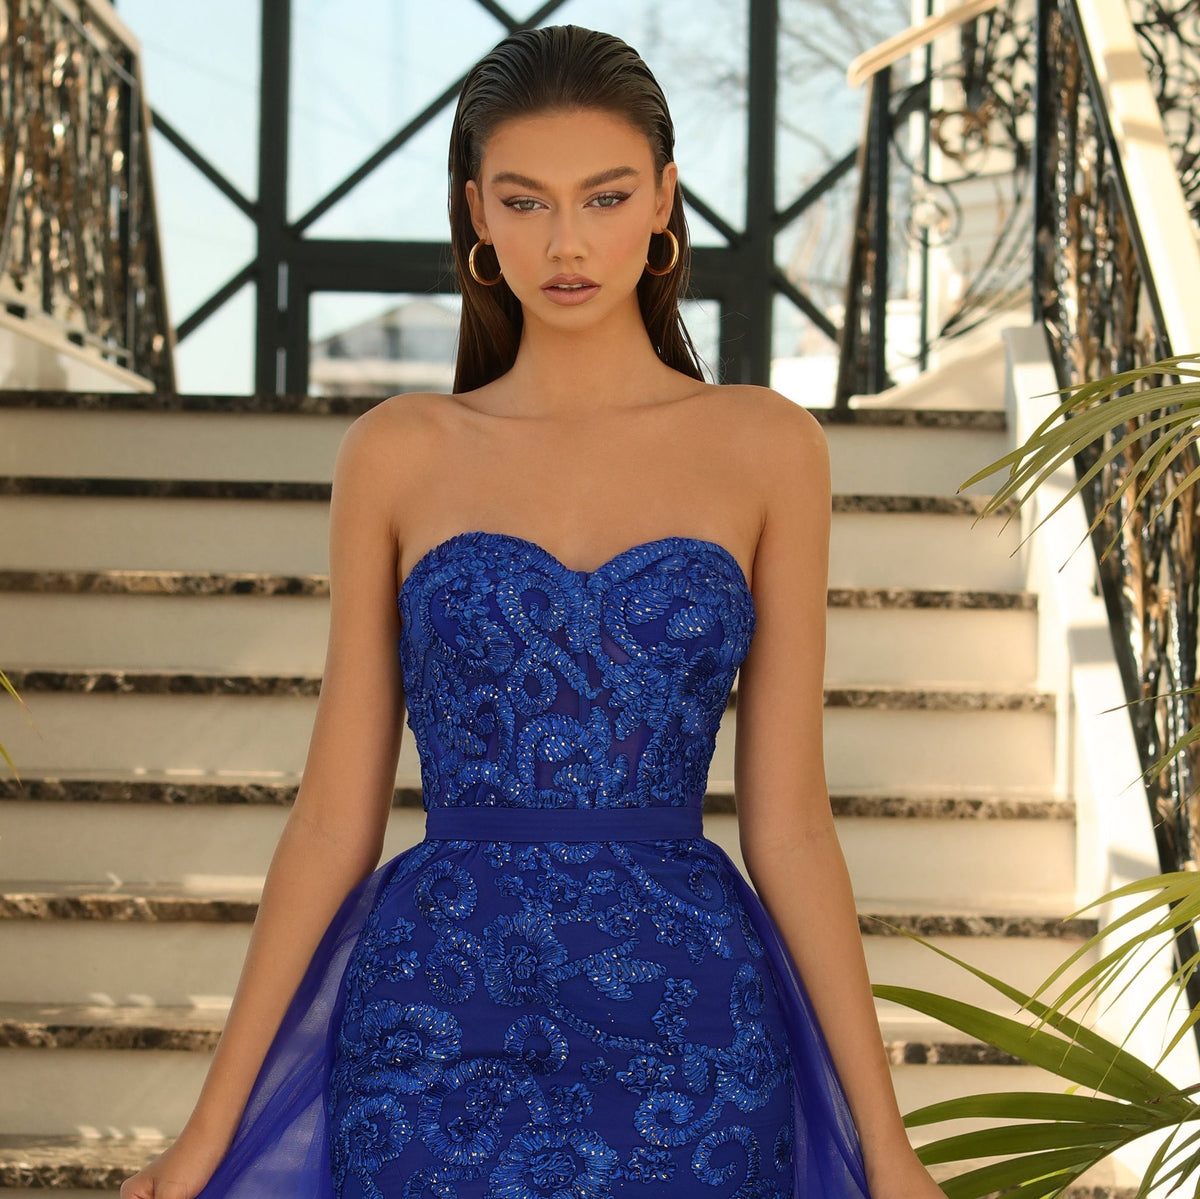 Nicoletta NC1003 Elegant Strapless Evening Dress - A captivating full-length gown with a sweetheart neckline, featuring a removable tulle skirt overlay adorned with Lace Applique for a touch of glamour. This is a picture of the front of the dress in the color royal close up.